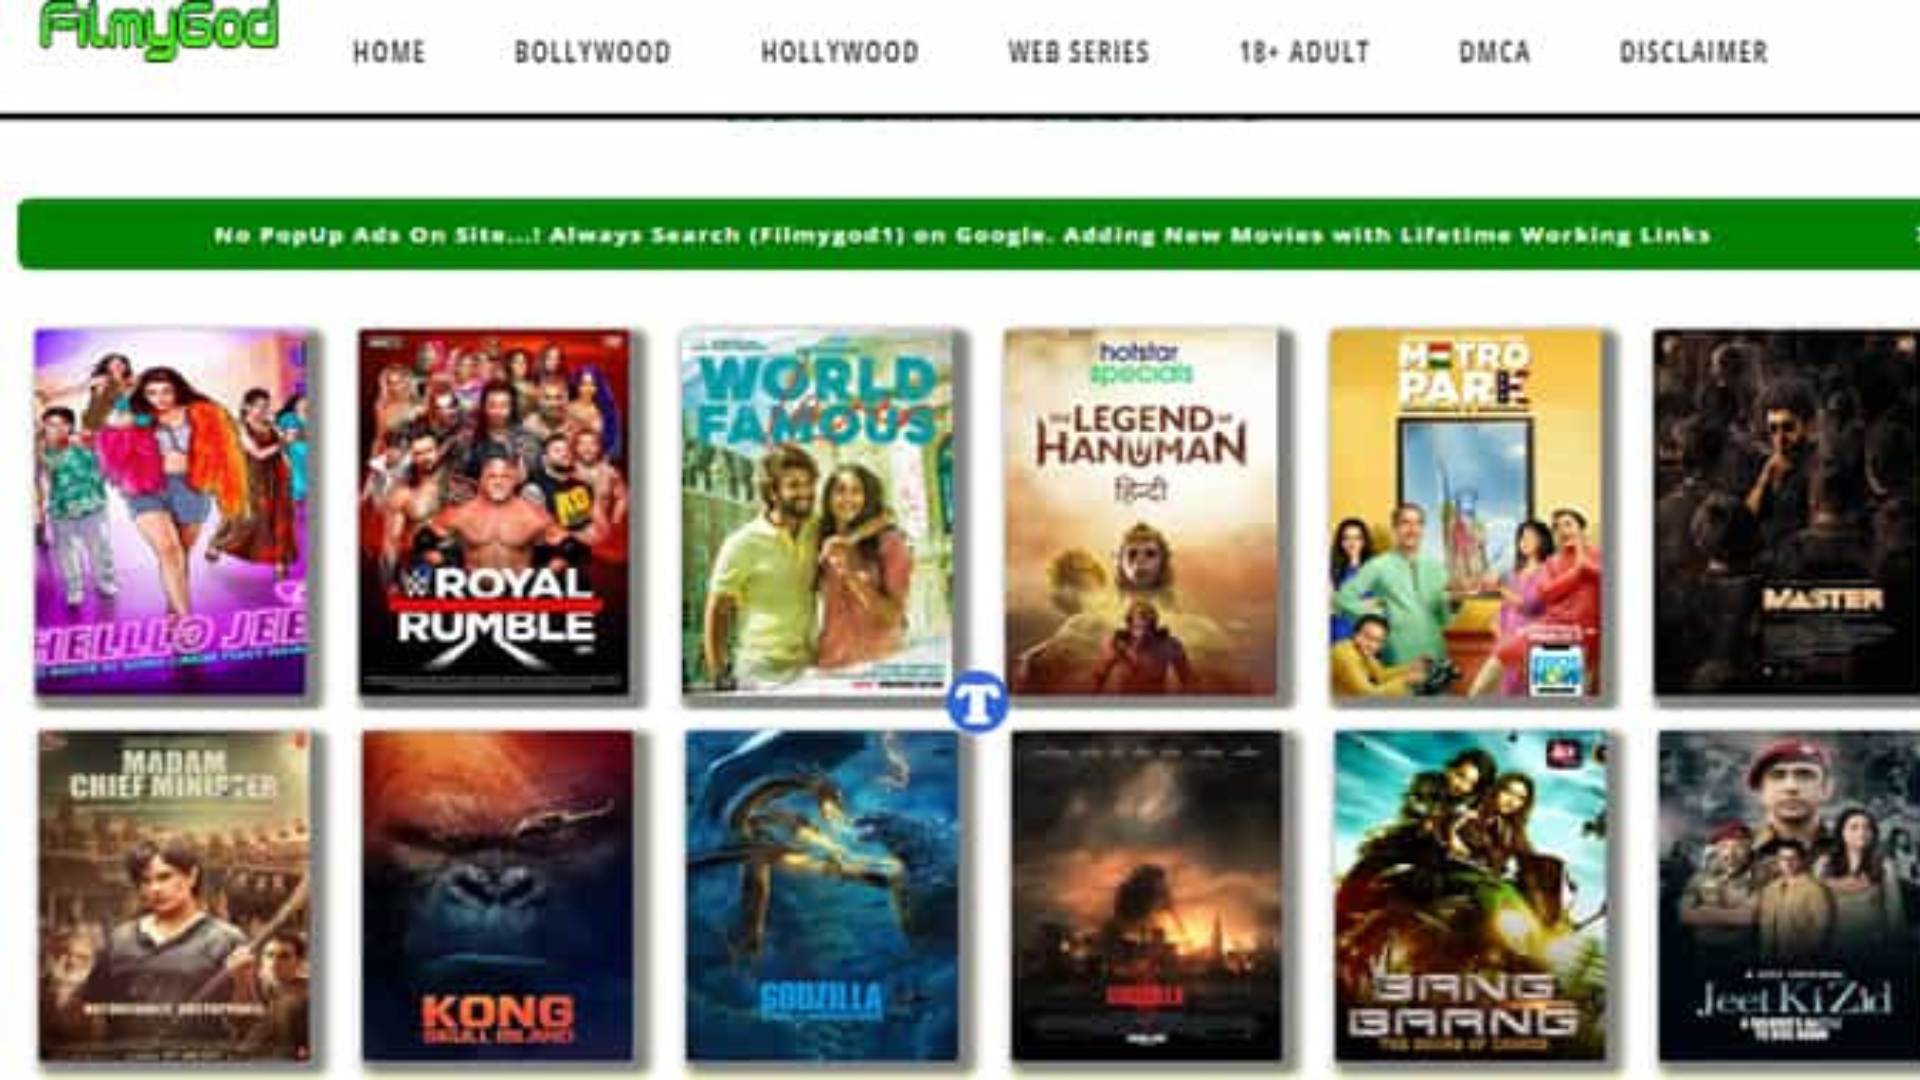 Filmygod webpage with various movie covers